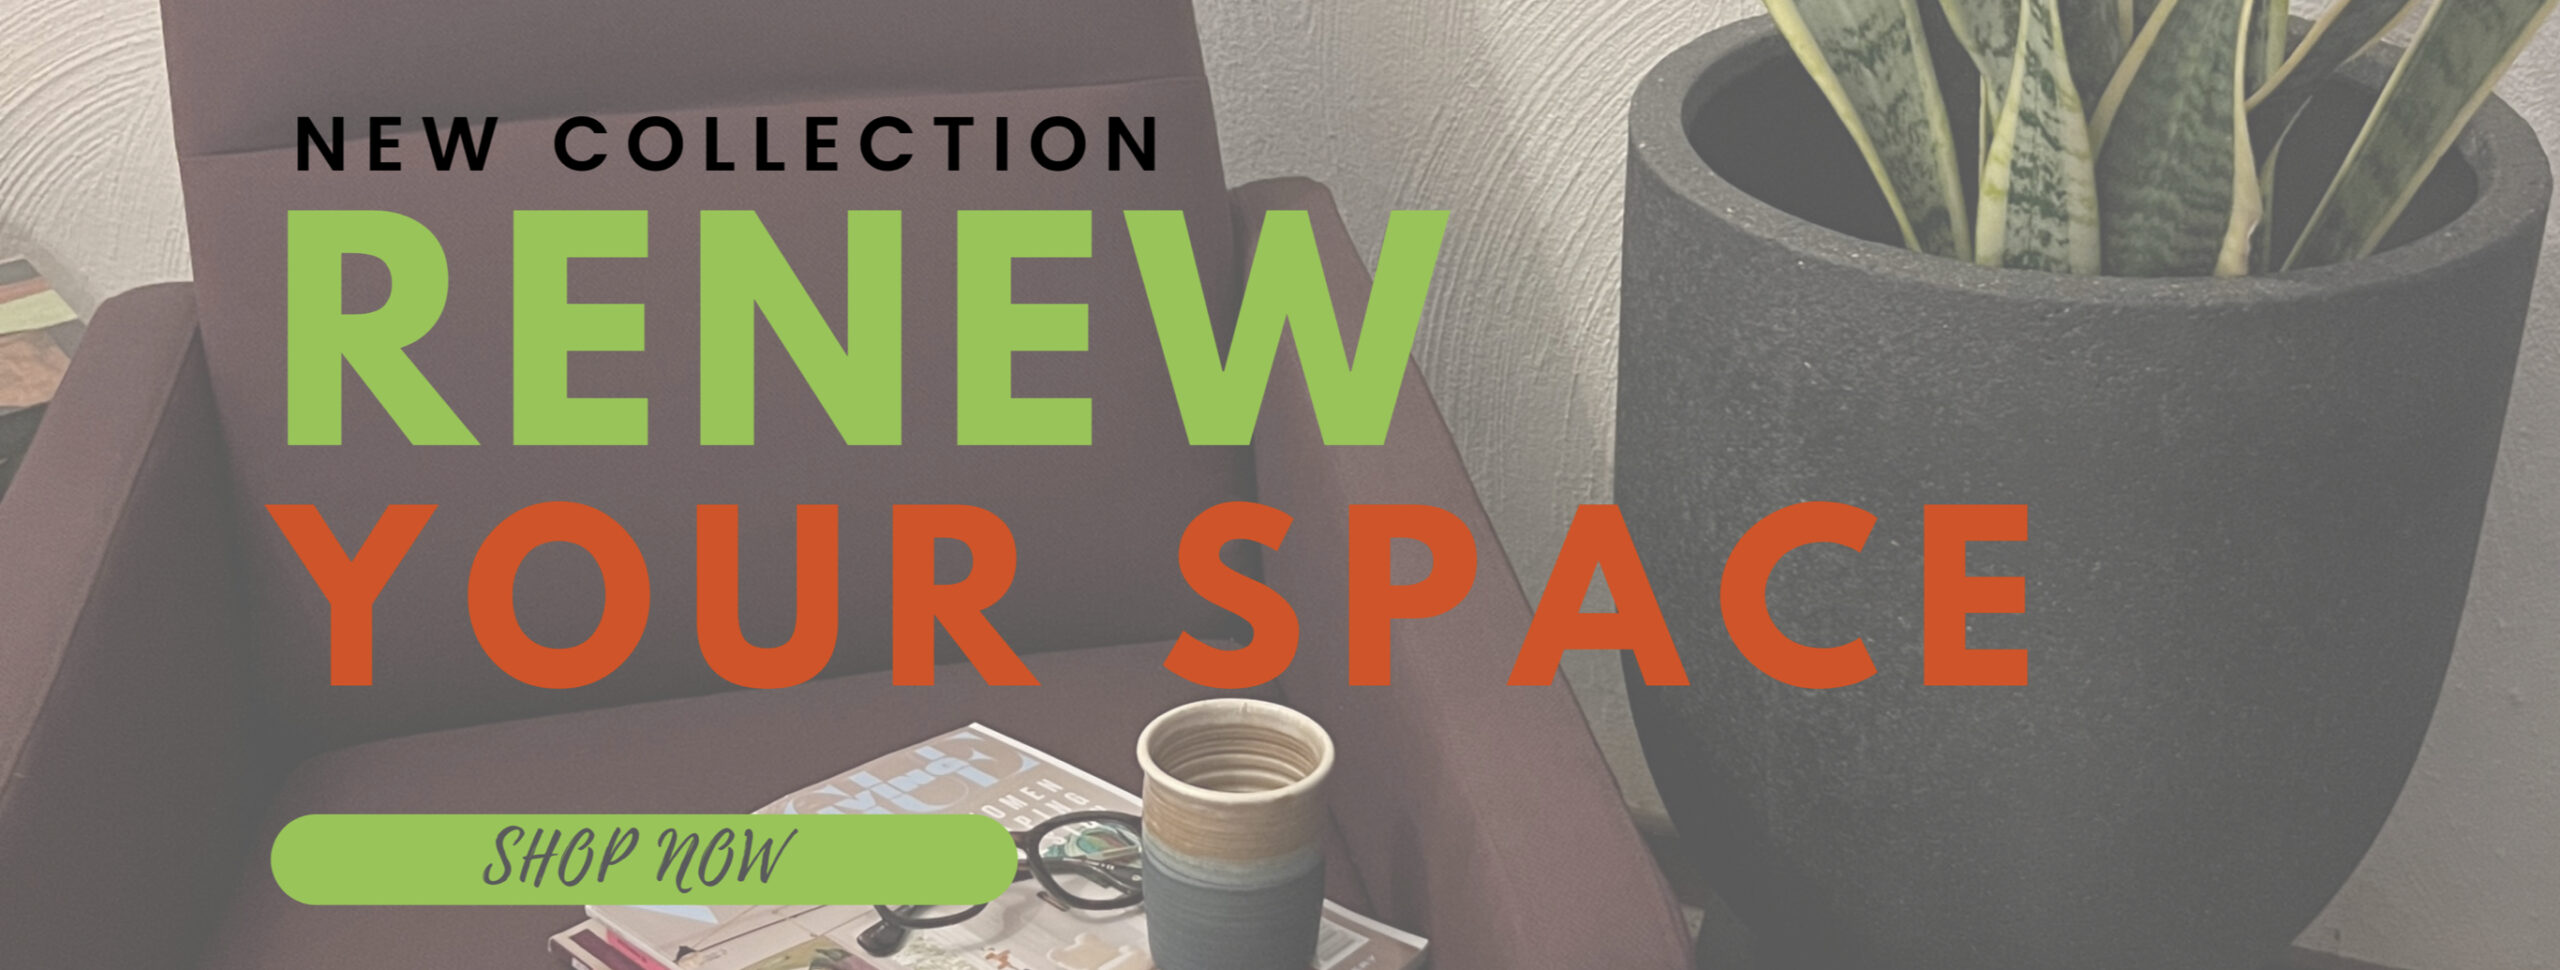 Renew your space